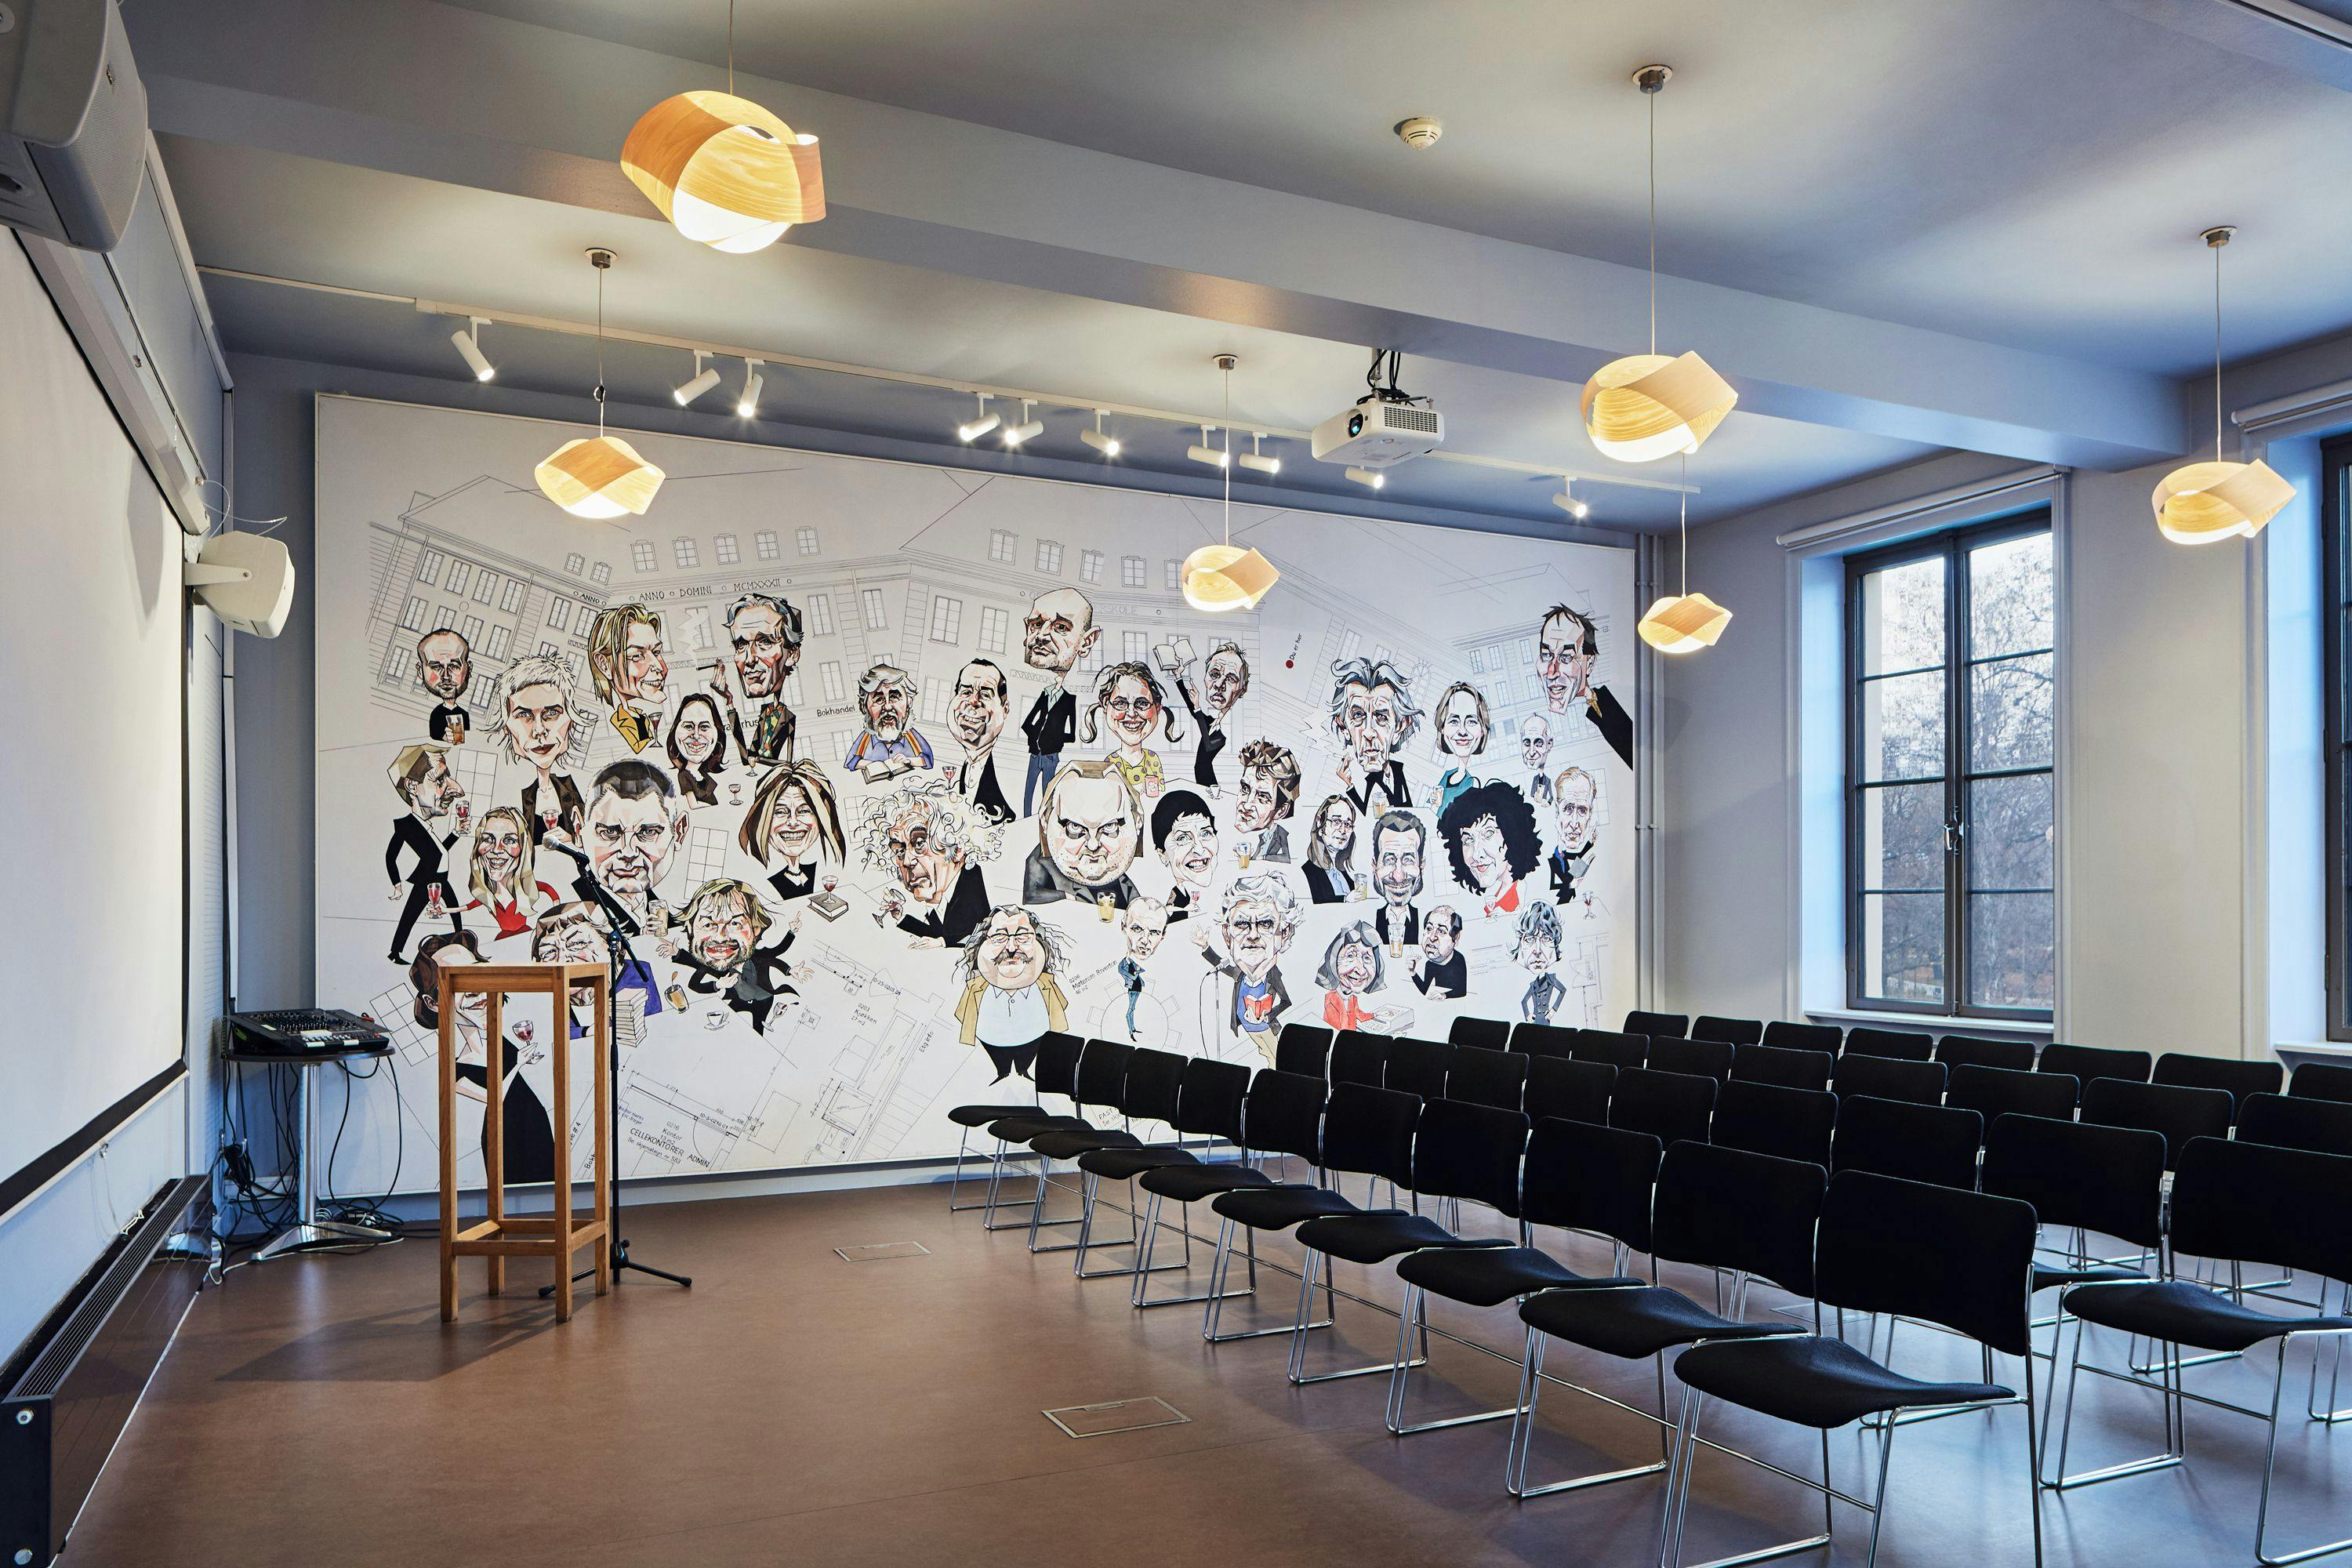  Image of the Kverneland room at Litteraturhuset, featuring a large wall illustration depicting Norwegian authors, drawn by Steffen Kverneland.